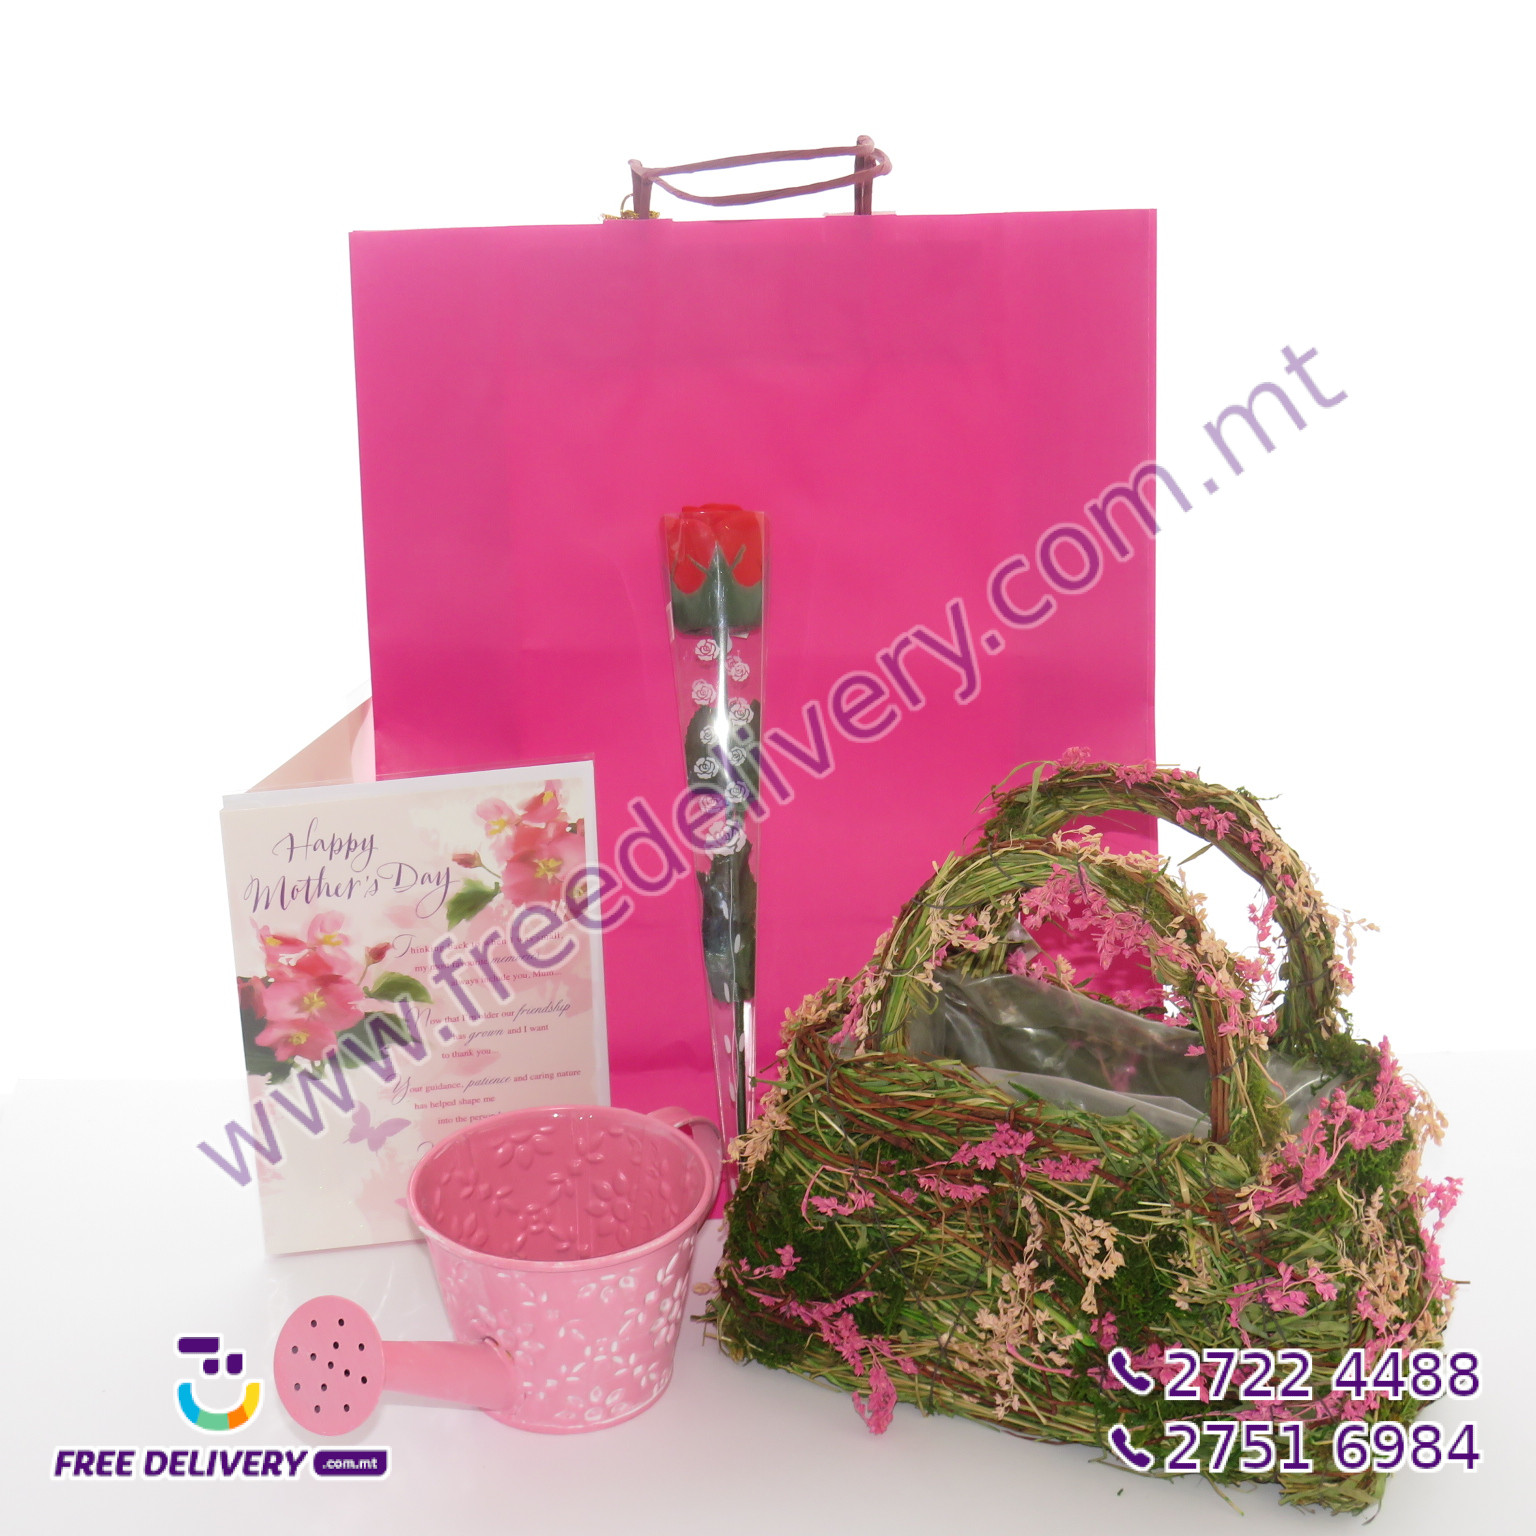 DEAREST MOTHER’S DAY GIFT PACKAGE